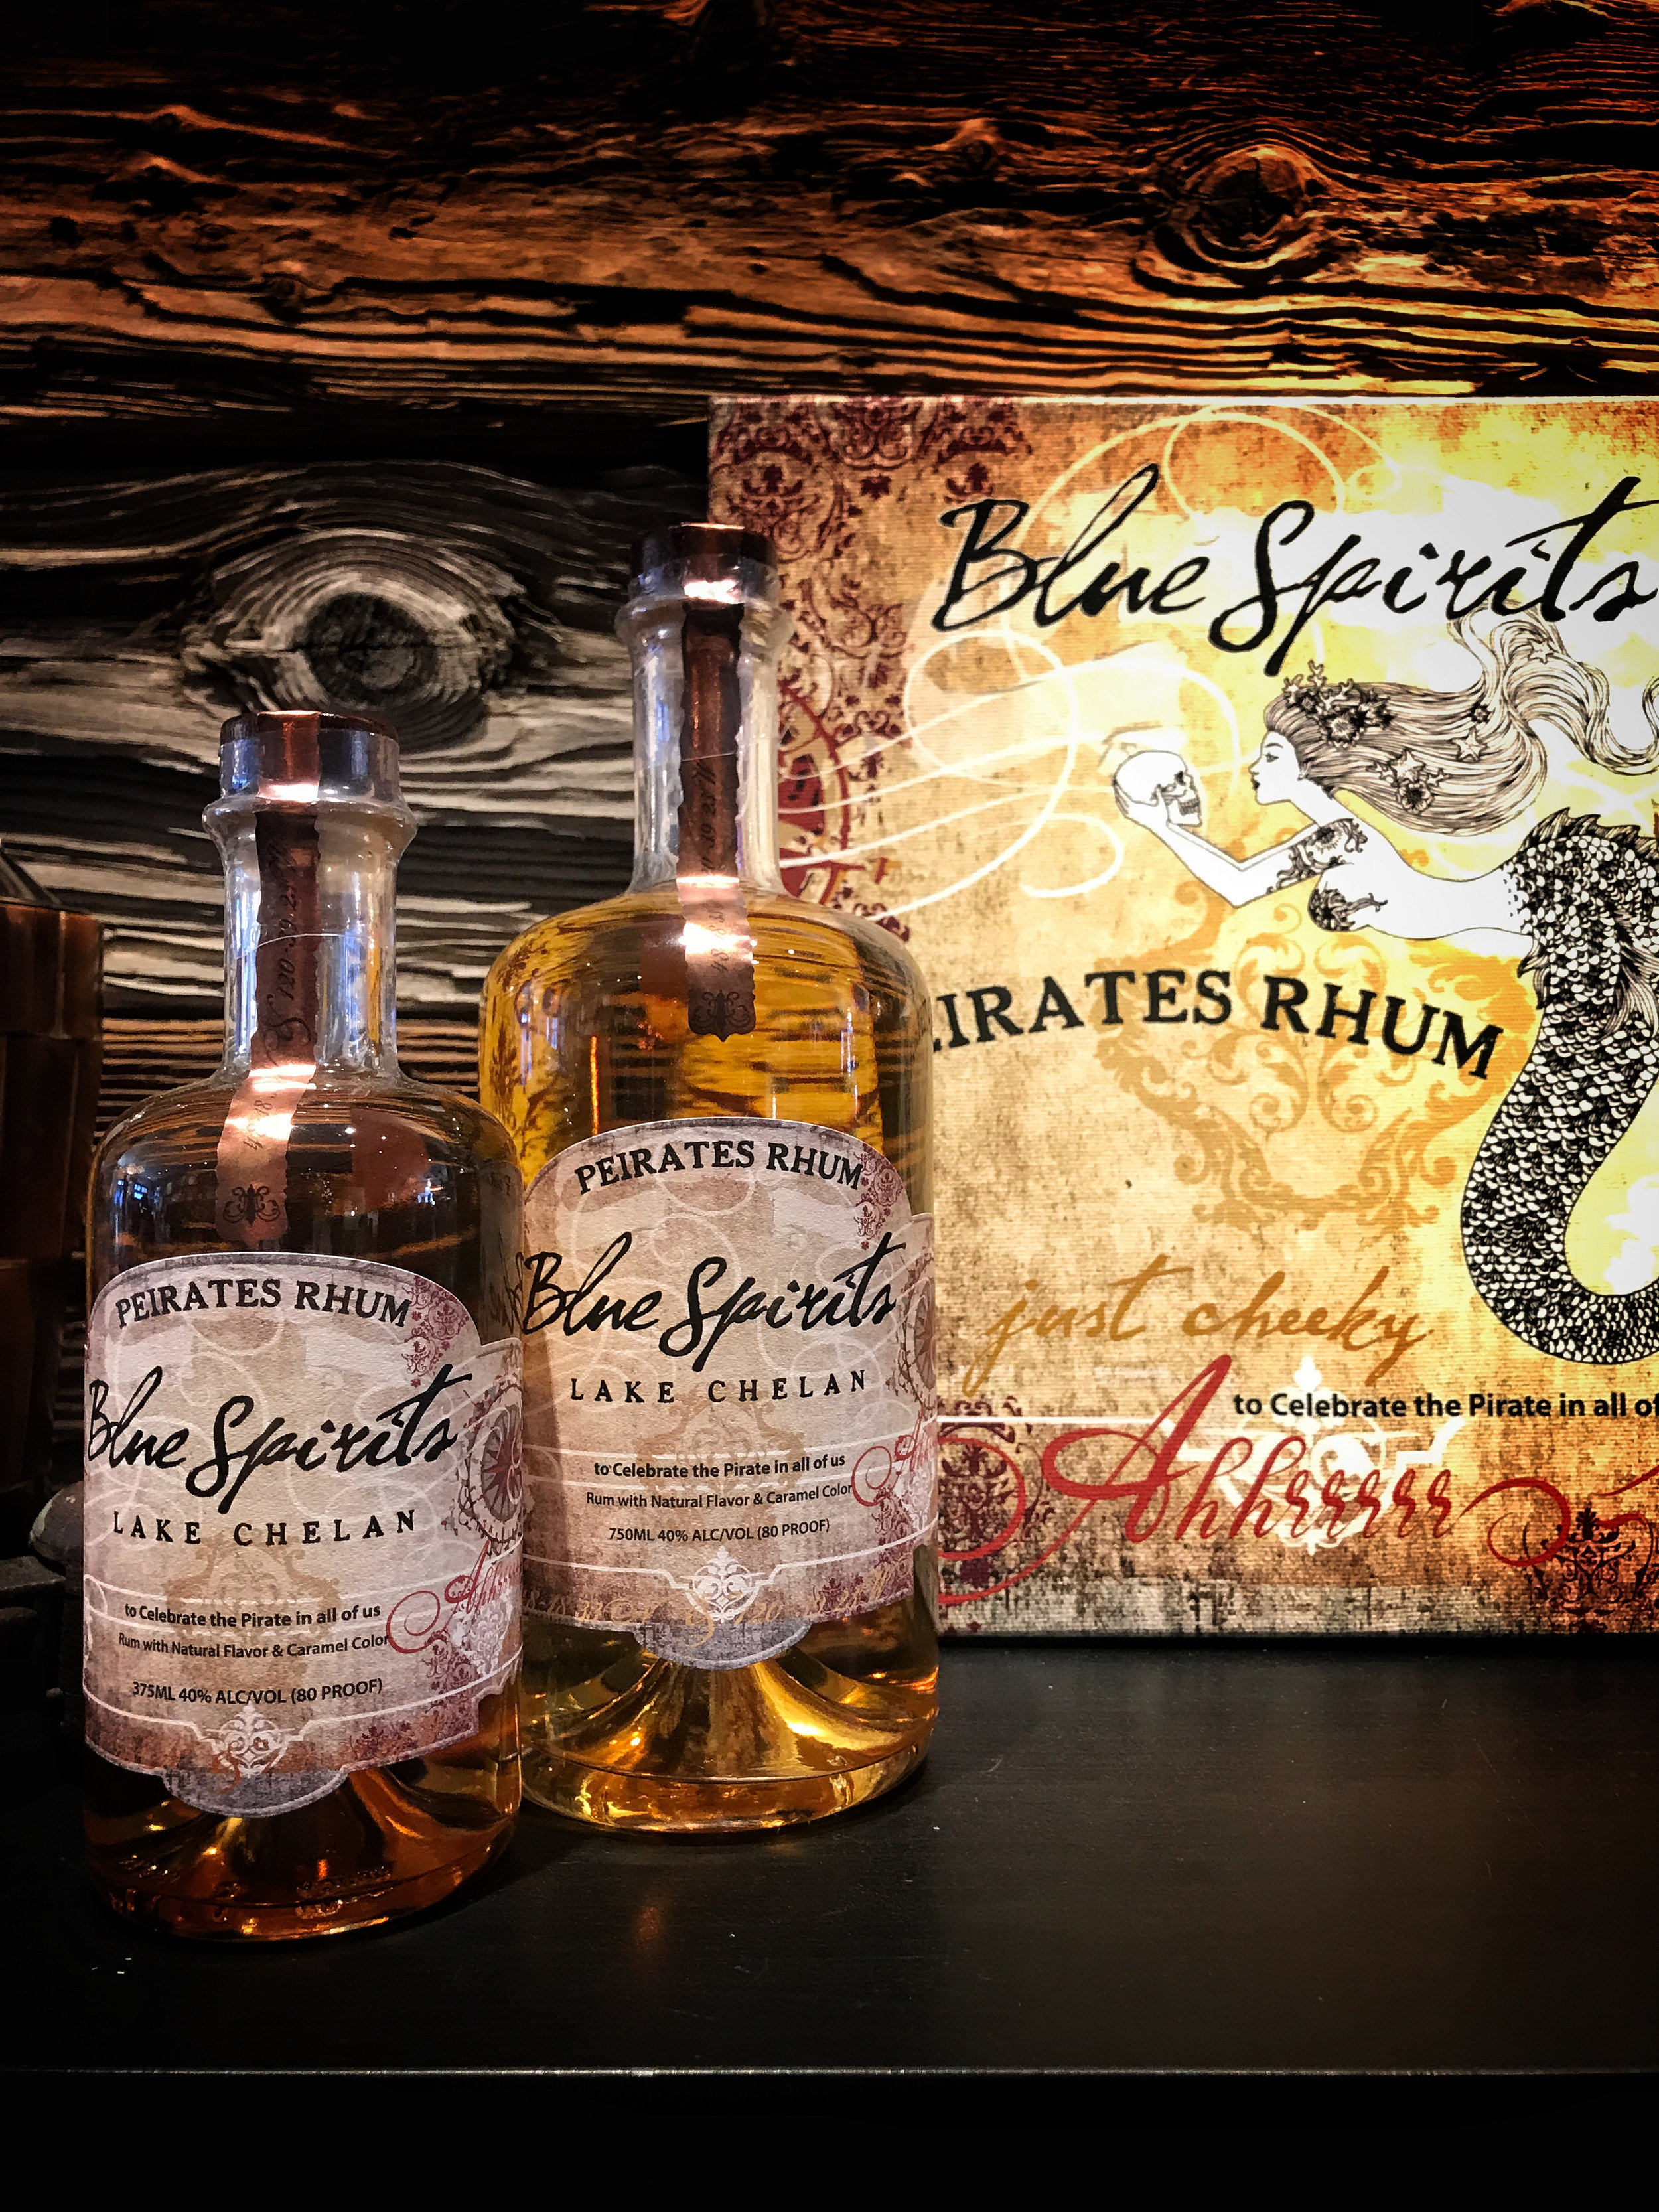  The bottle artwork for Blue Spirits is stunning. Don't miss a trip to their tasting room. 